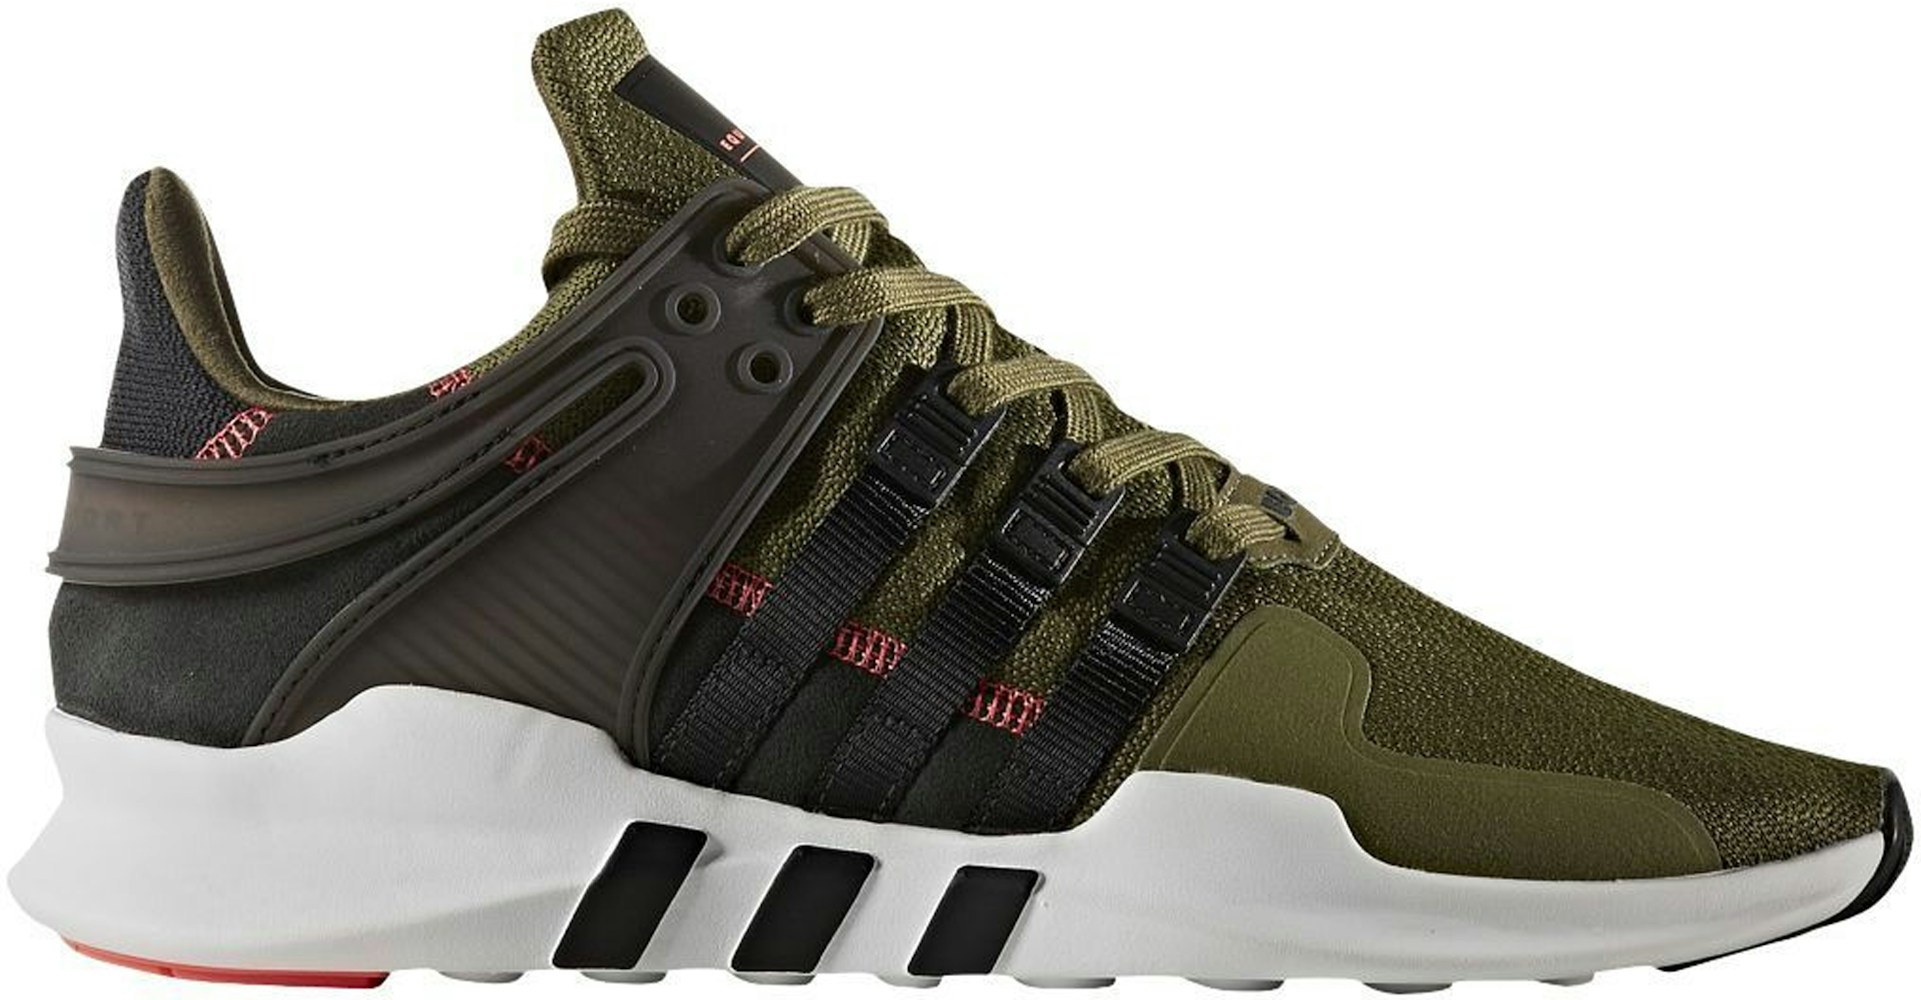 adidas EQT Support Adv Olive - S76961